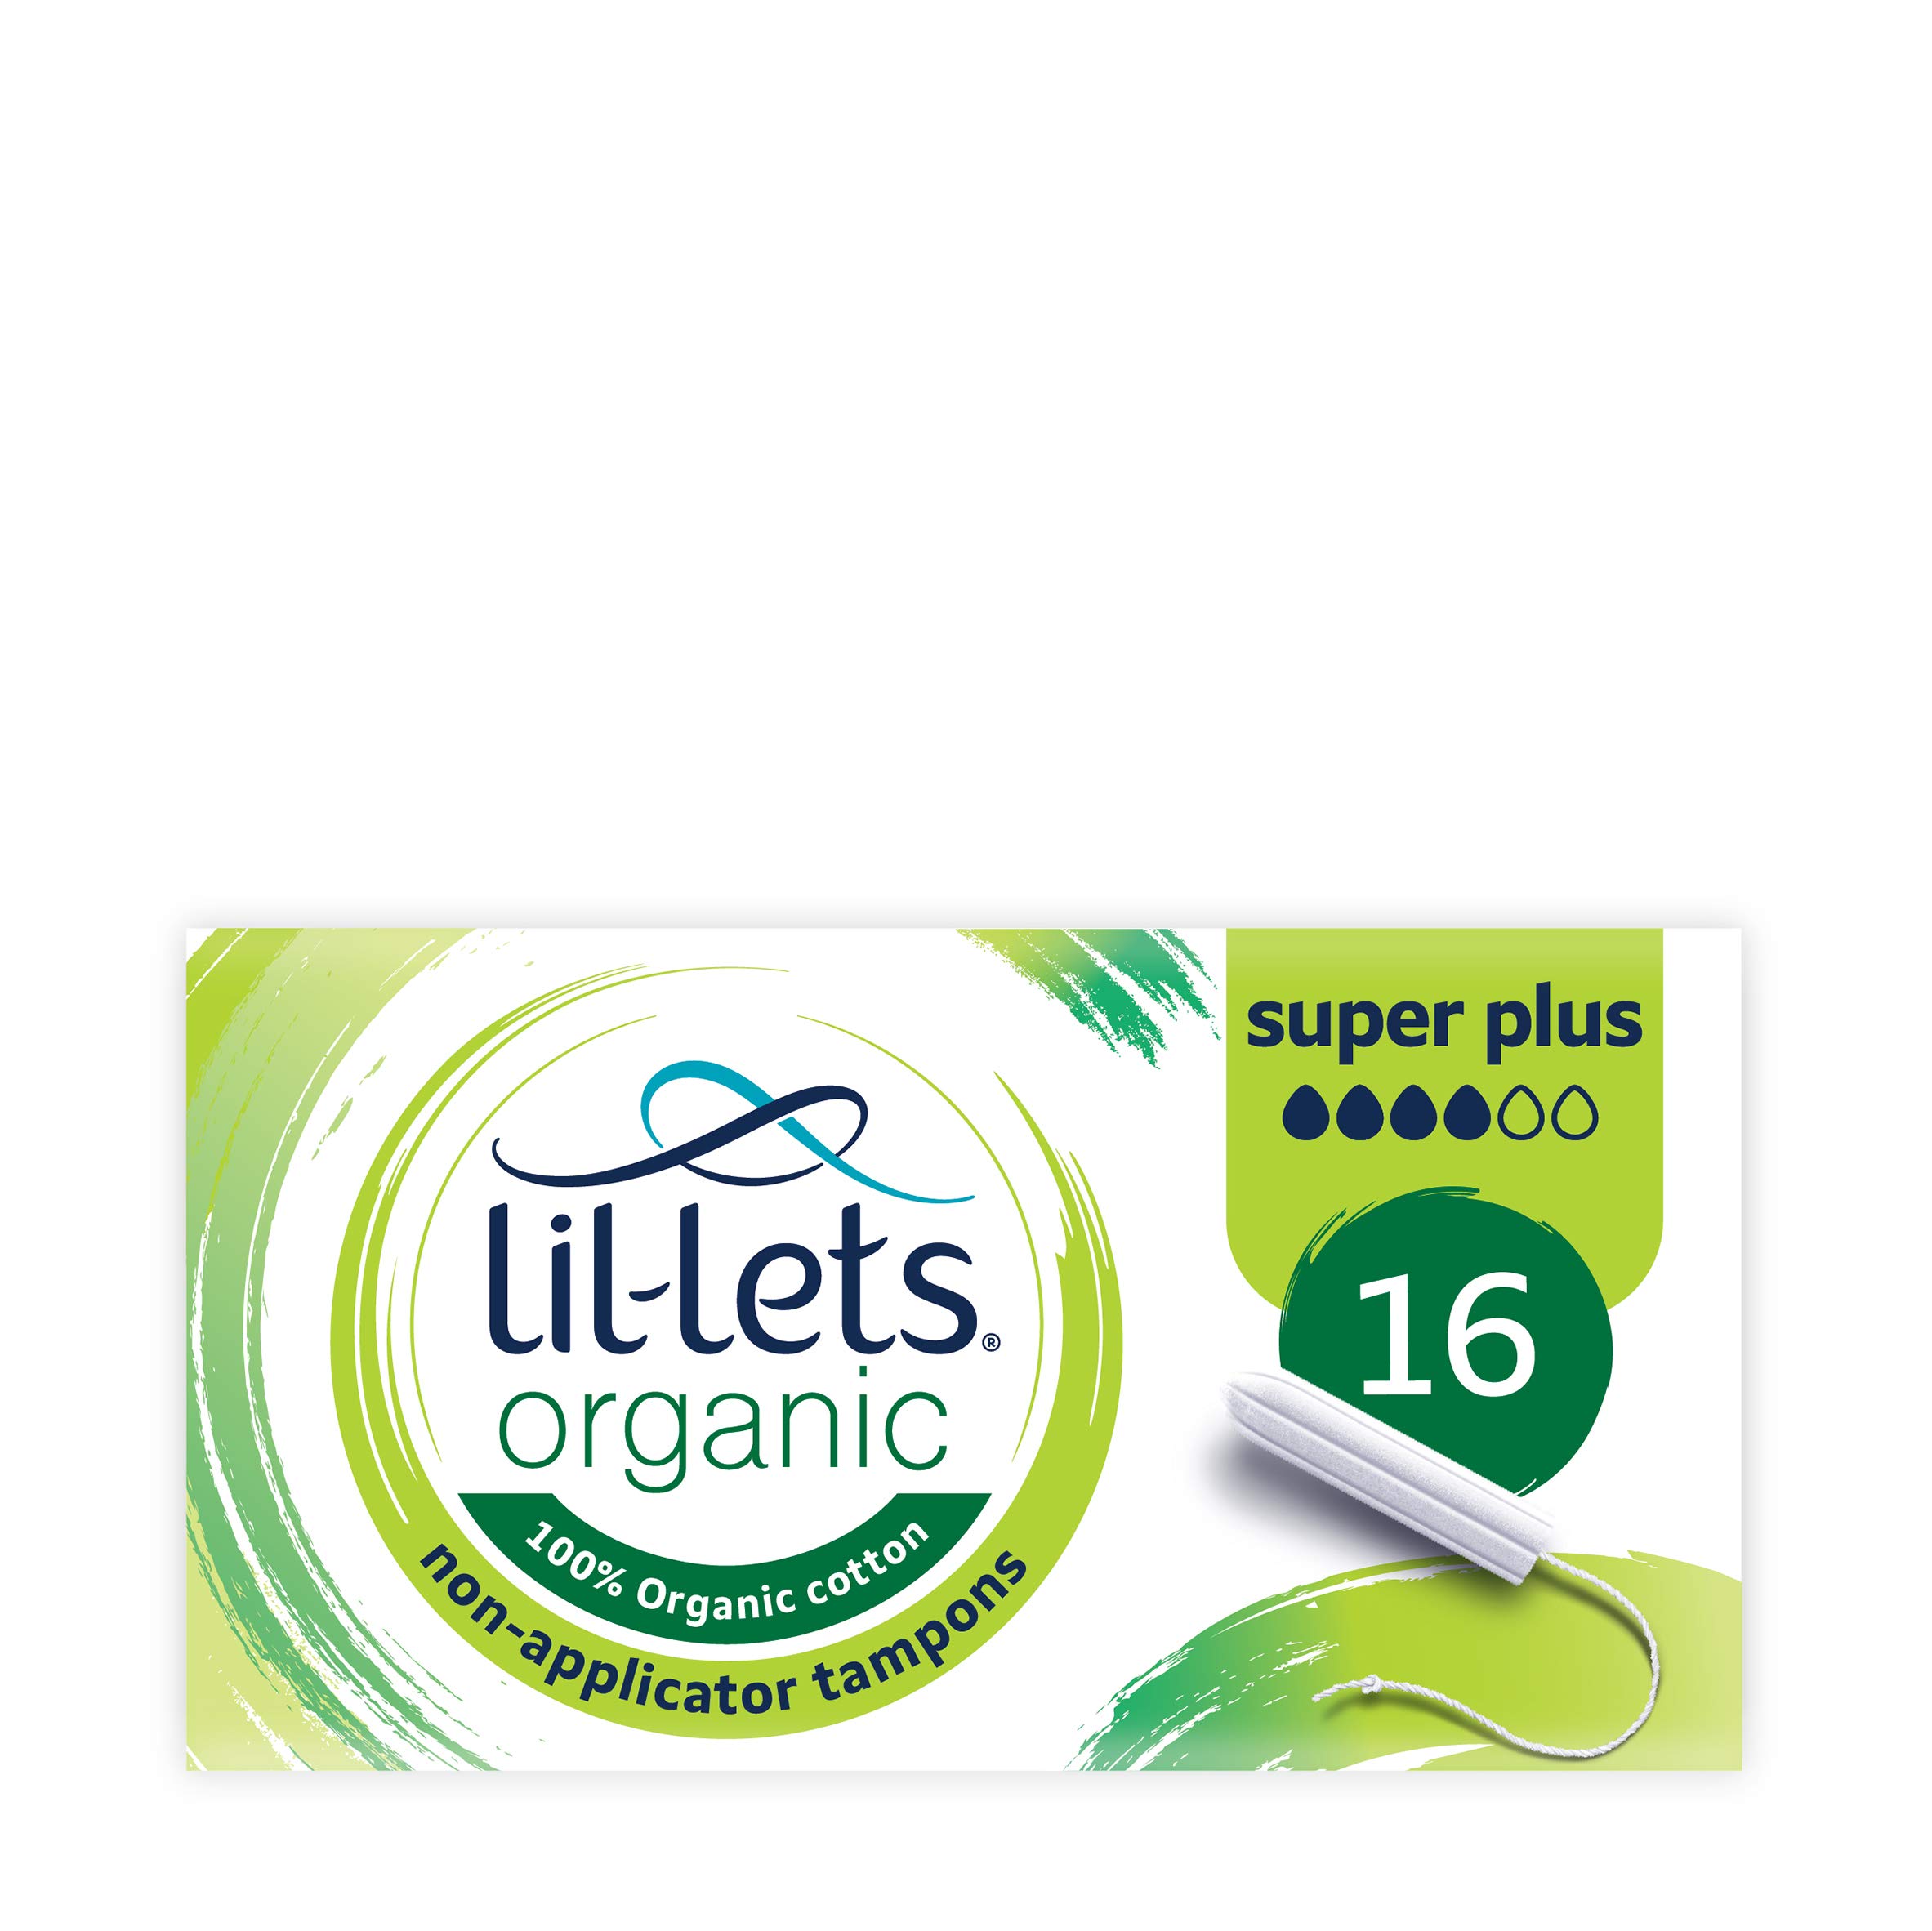 Lil-Lets Non-Applicator Ultra Tampons, Pack of 10 & Non-Applicator